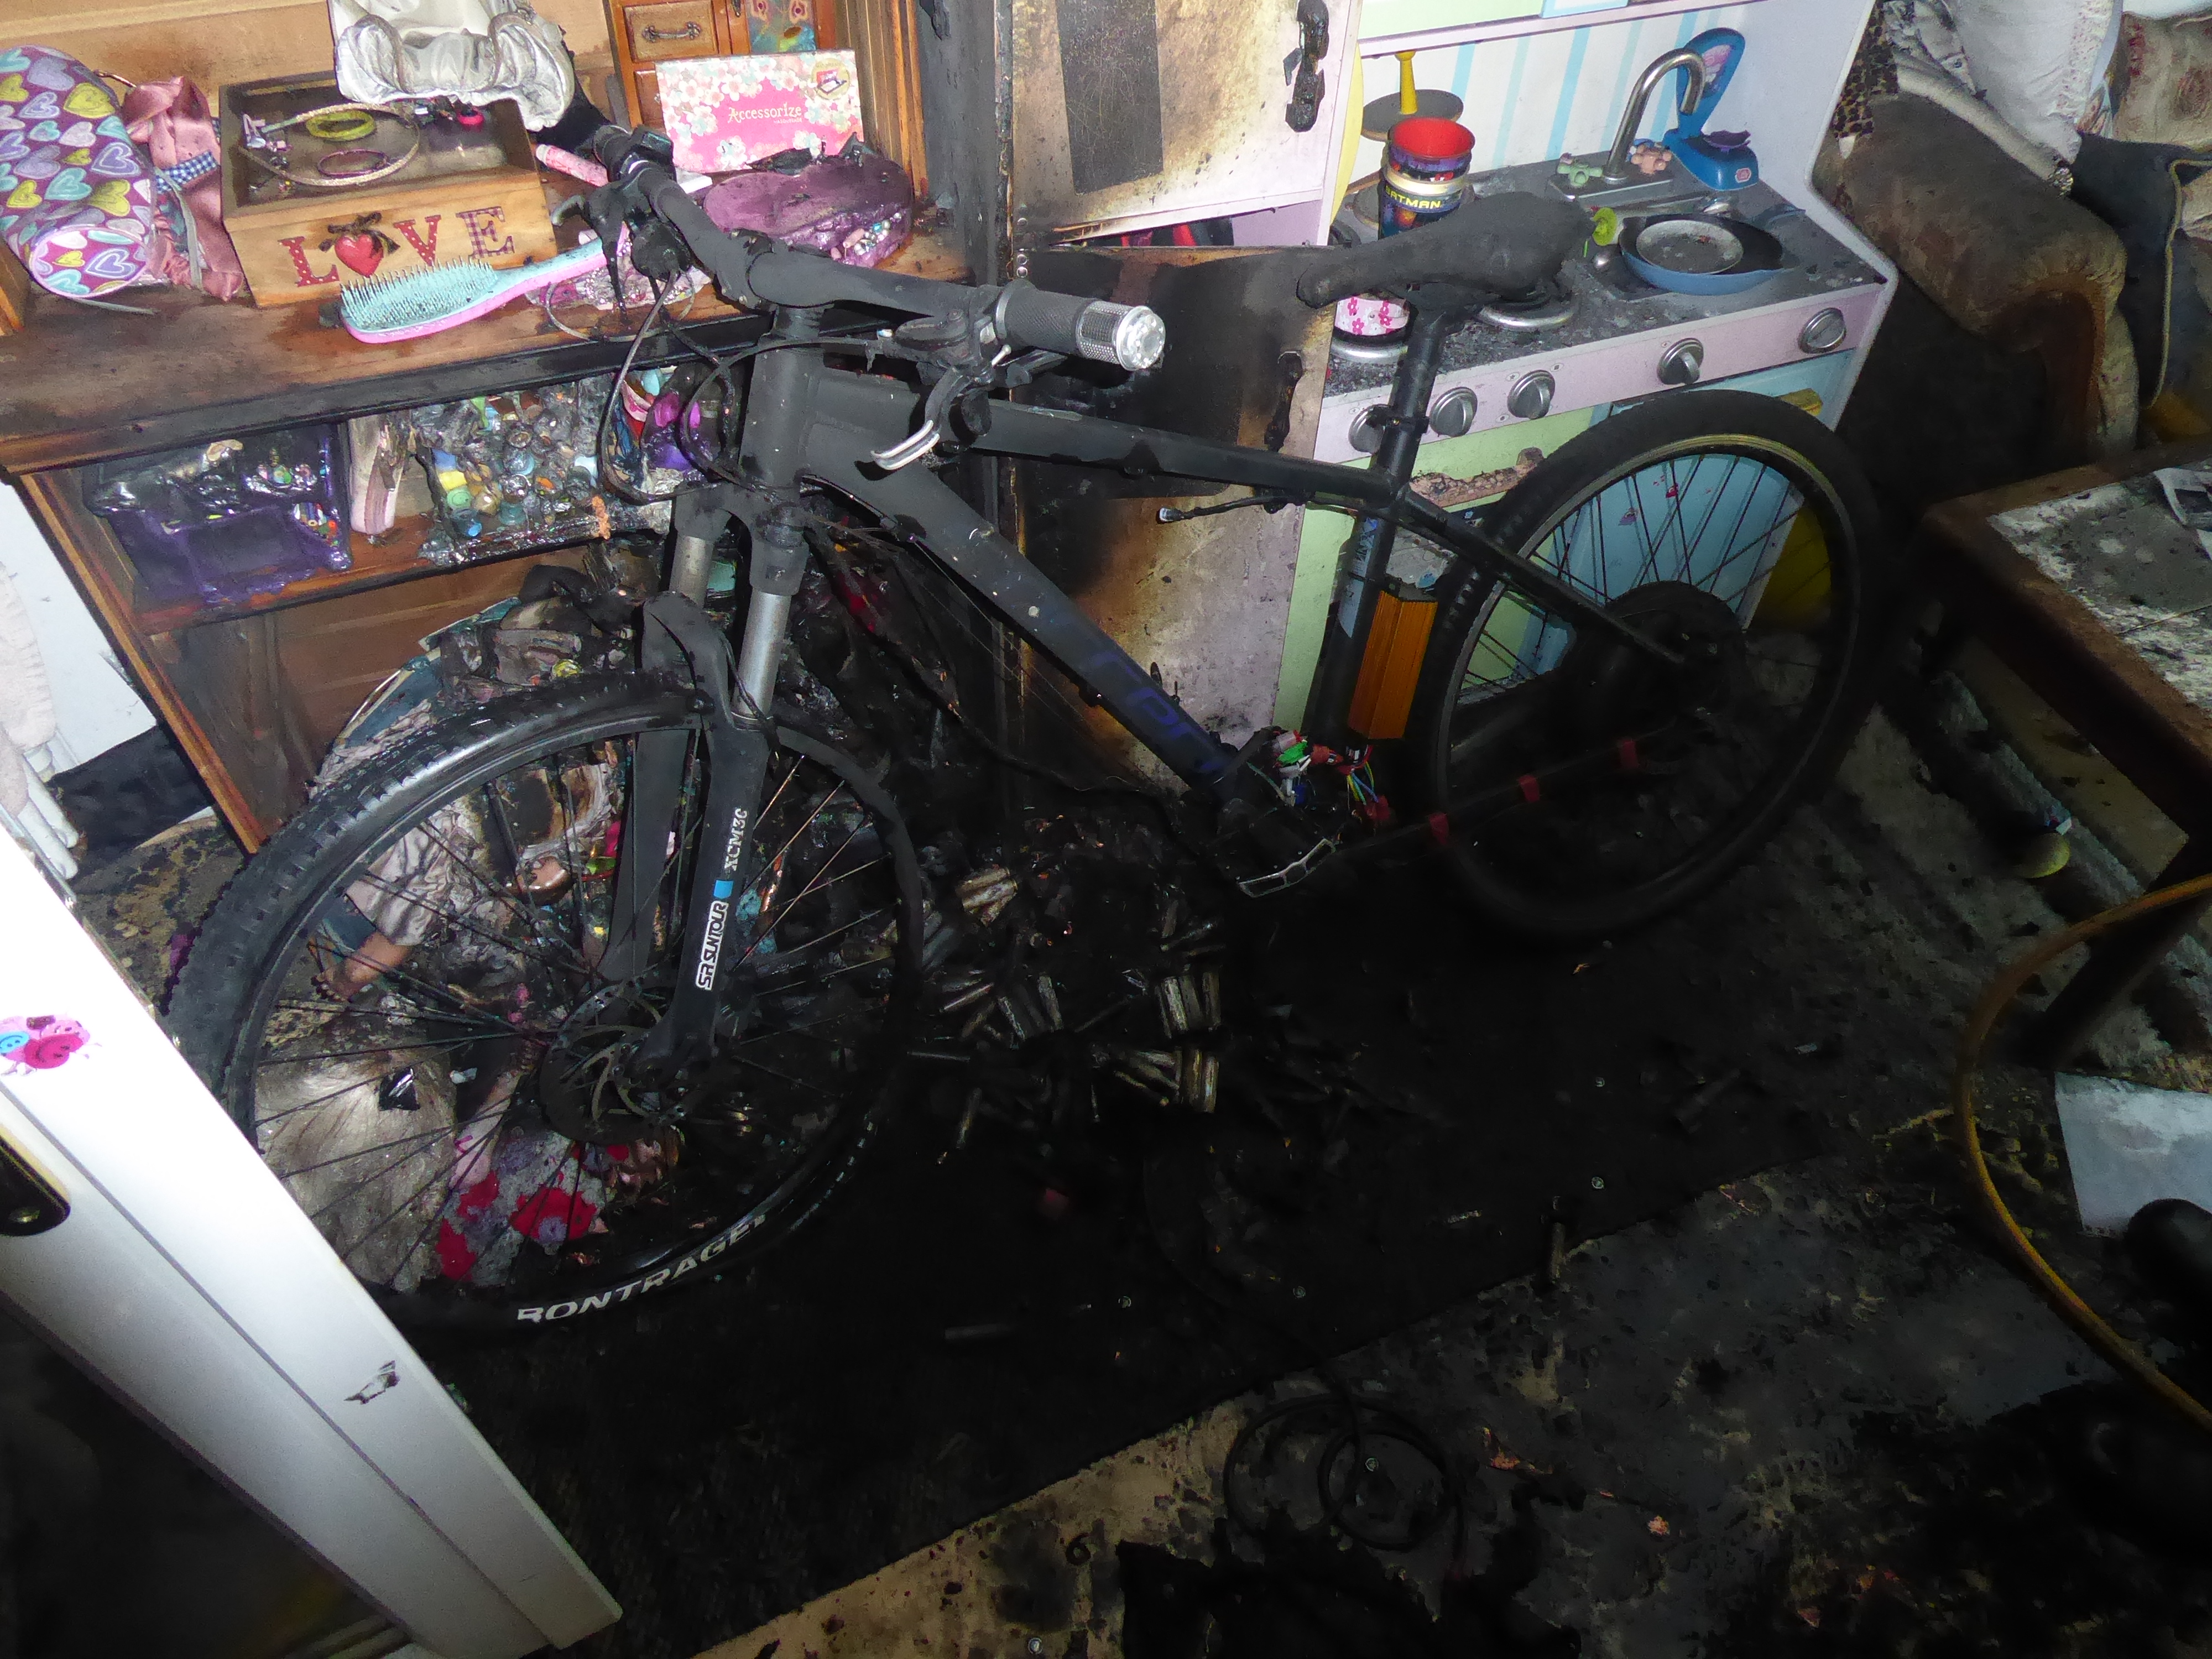 An e-bike and room damaged by a lithium-ion battery fire